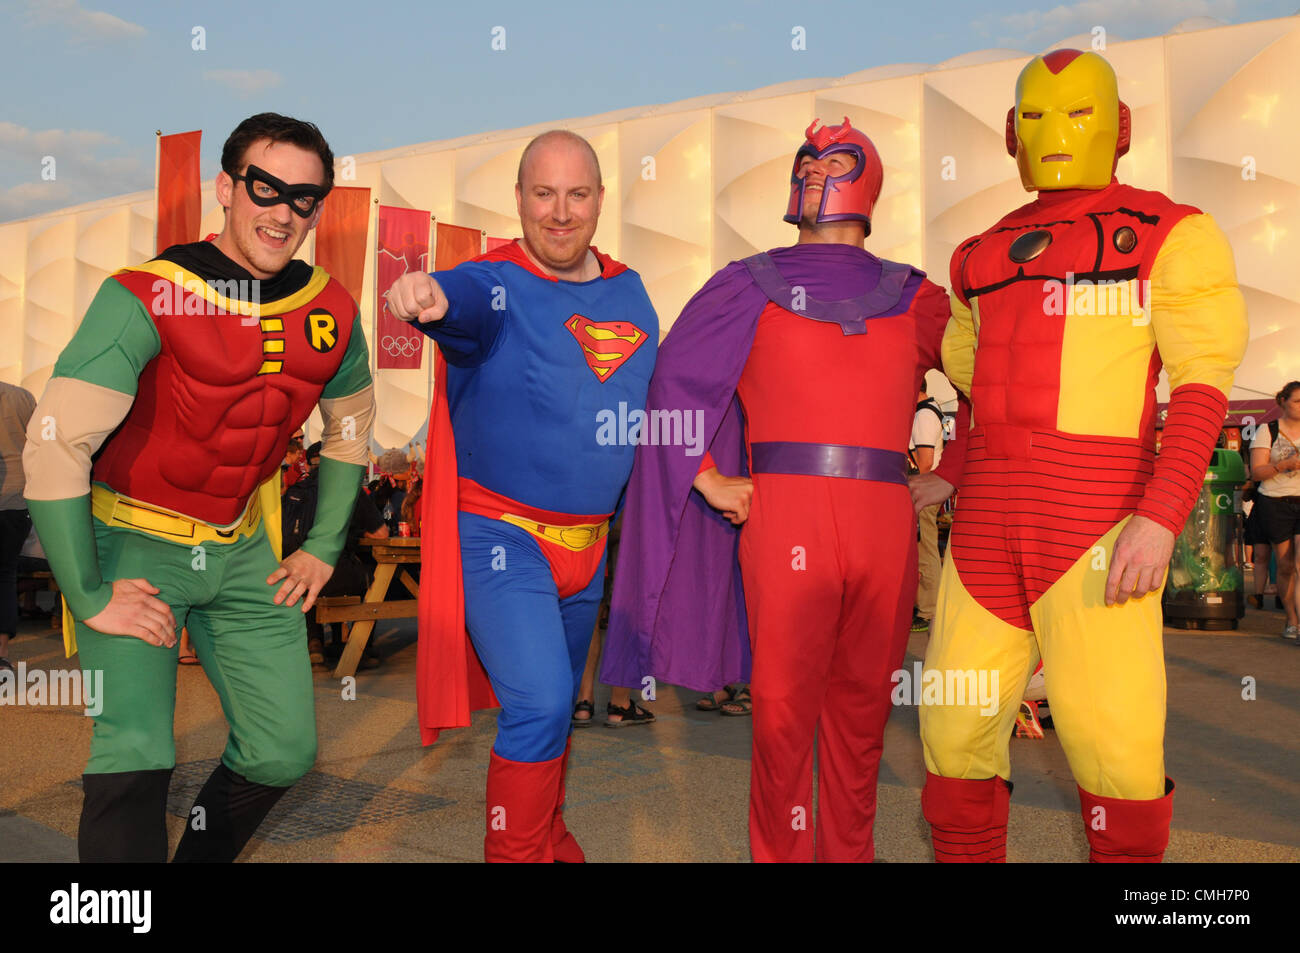 9th Aug 2012. A group of Olympic fans dressed as superheroes enjoy the atmosphere in the Olympic Park in front of the basketball arena in the 2012 Olympic Park, London, 9 August 2012. Stock Photo